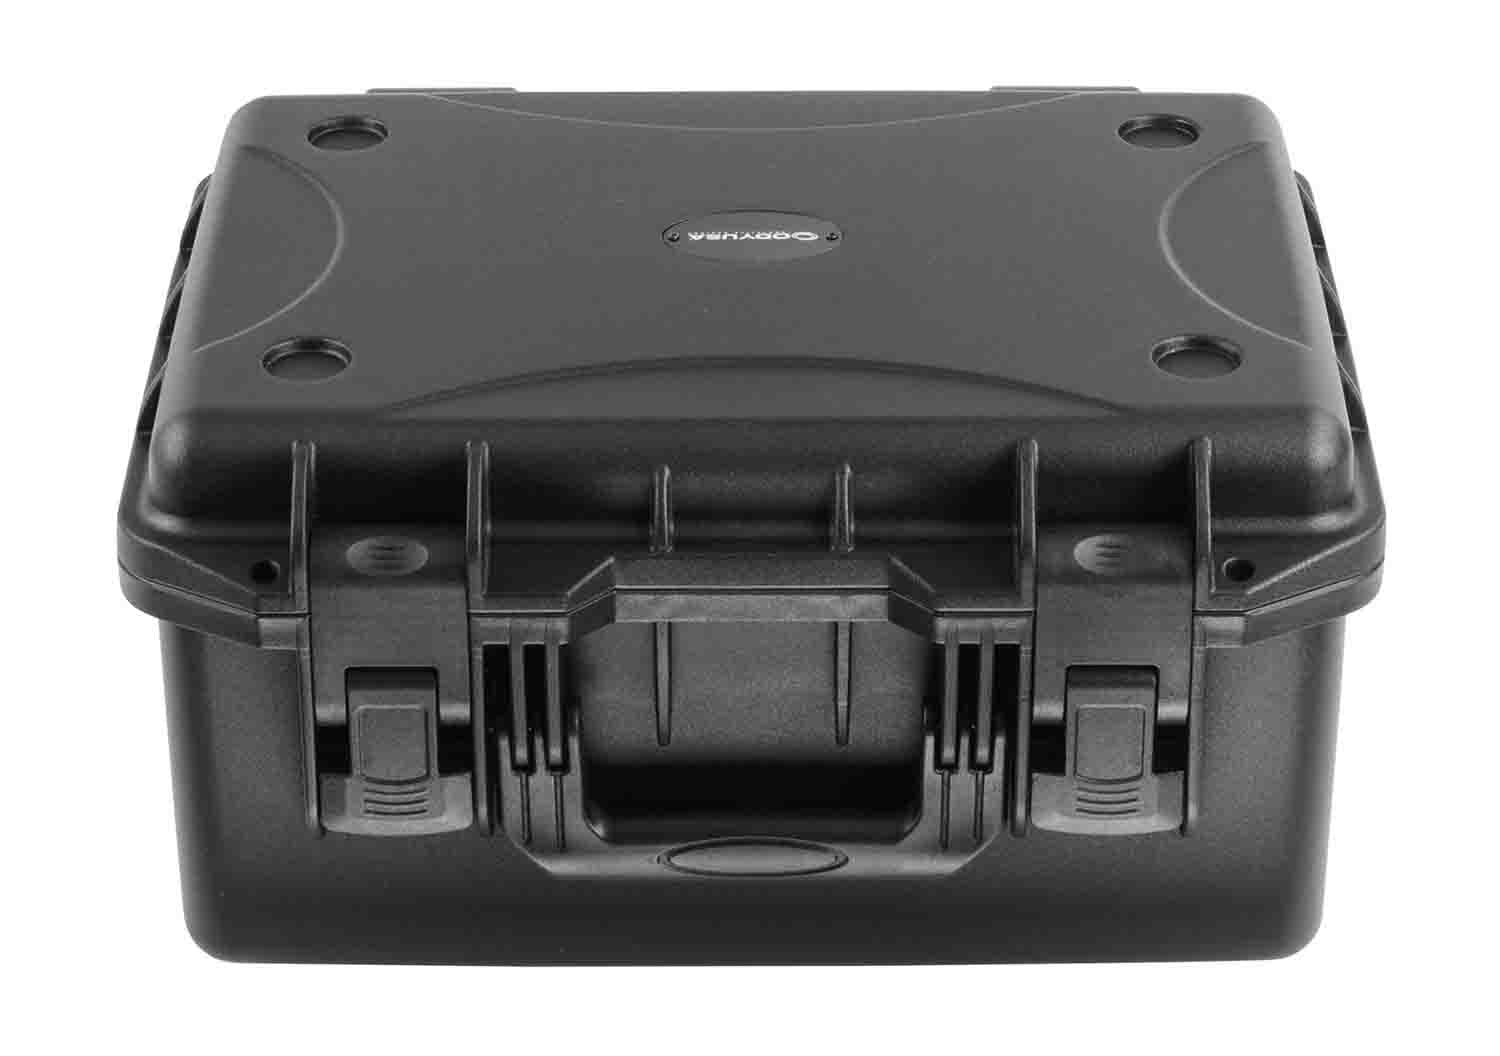 Odyssey VU151008NF Vulcan Injection-Molded Utility Case - 15.25 x 10.5 x 6.25" Interior - Hollywood DJ